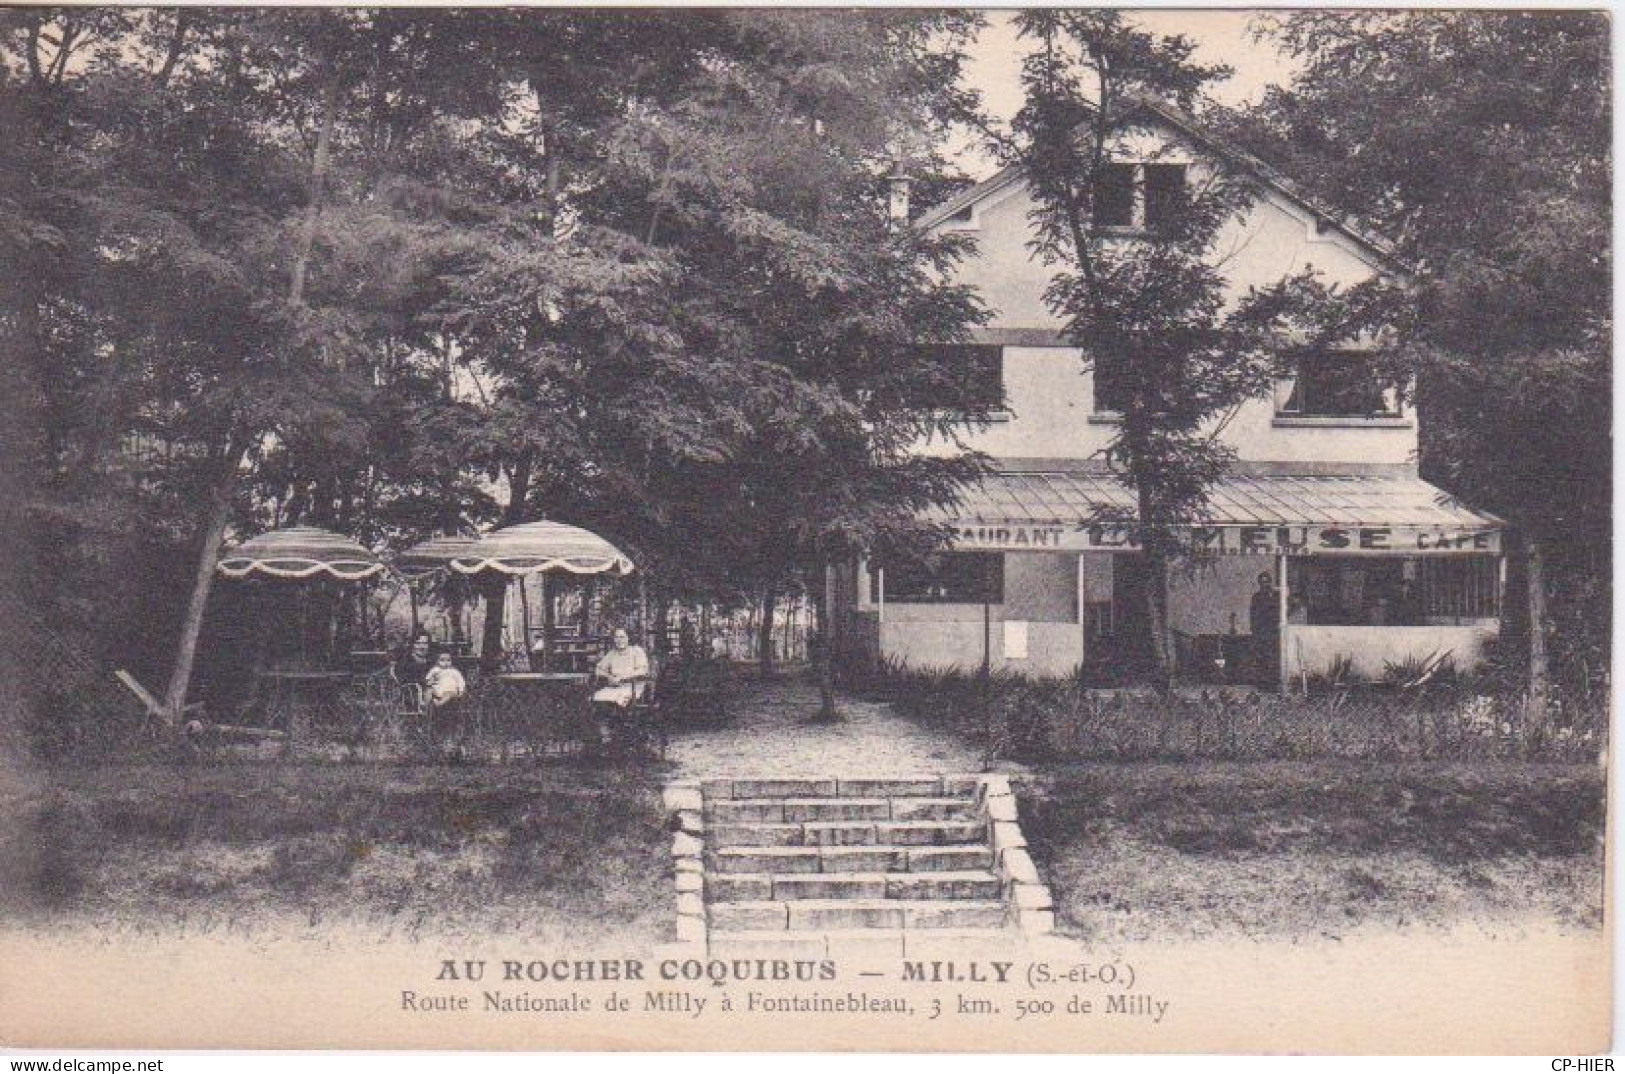 91 - MILLY LA FORET - AU ROCHER COQUIBUS - ROUTE NATIONALE DE MILLY A FONTAINEBLEAU - RESTAURANT  CAFE - Milly La Foret